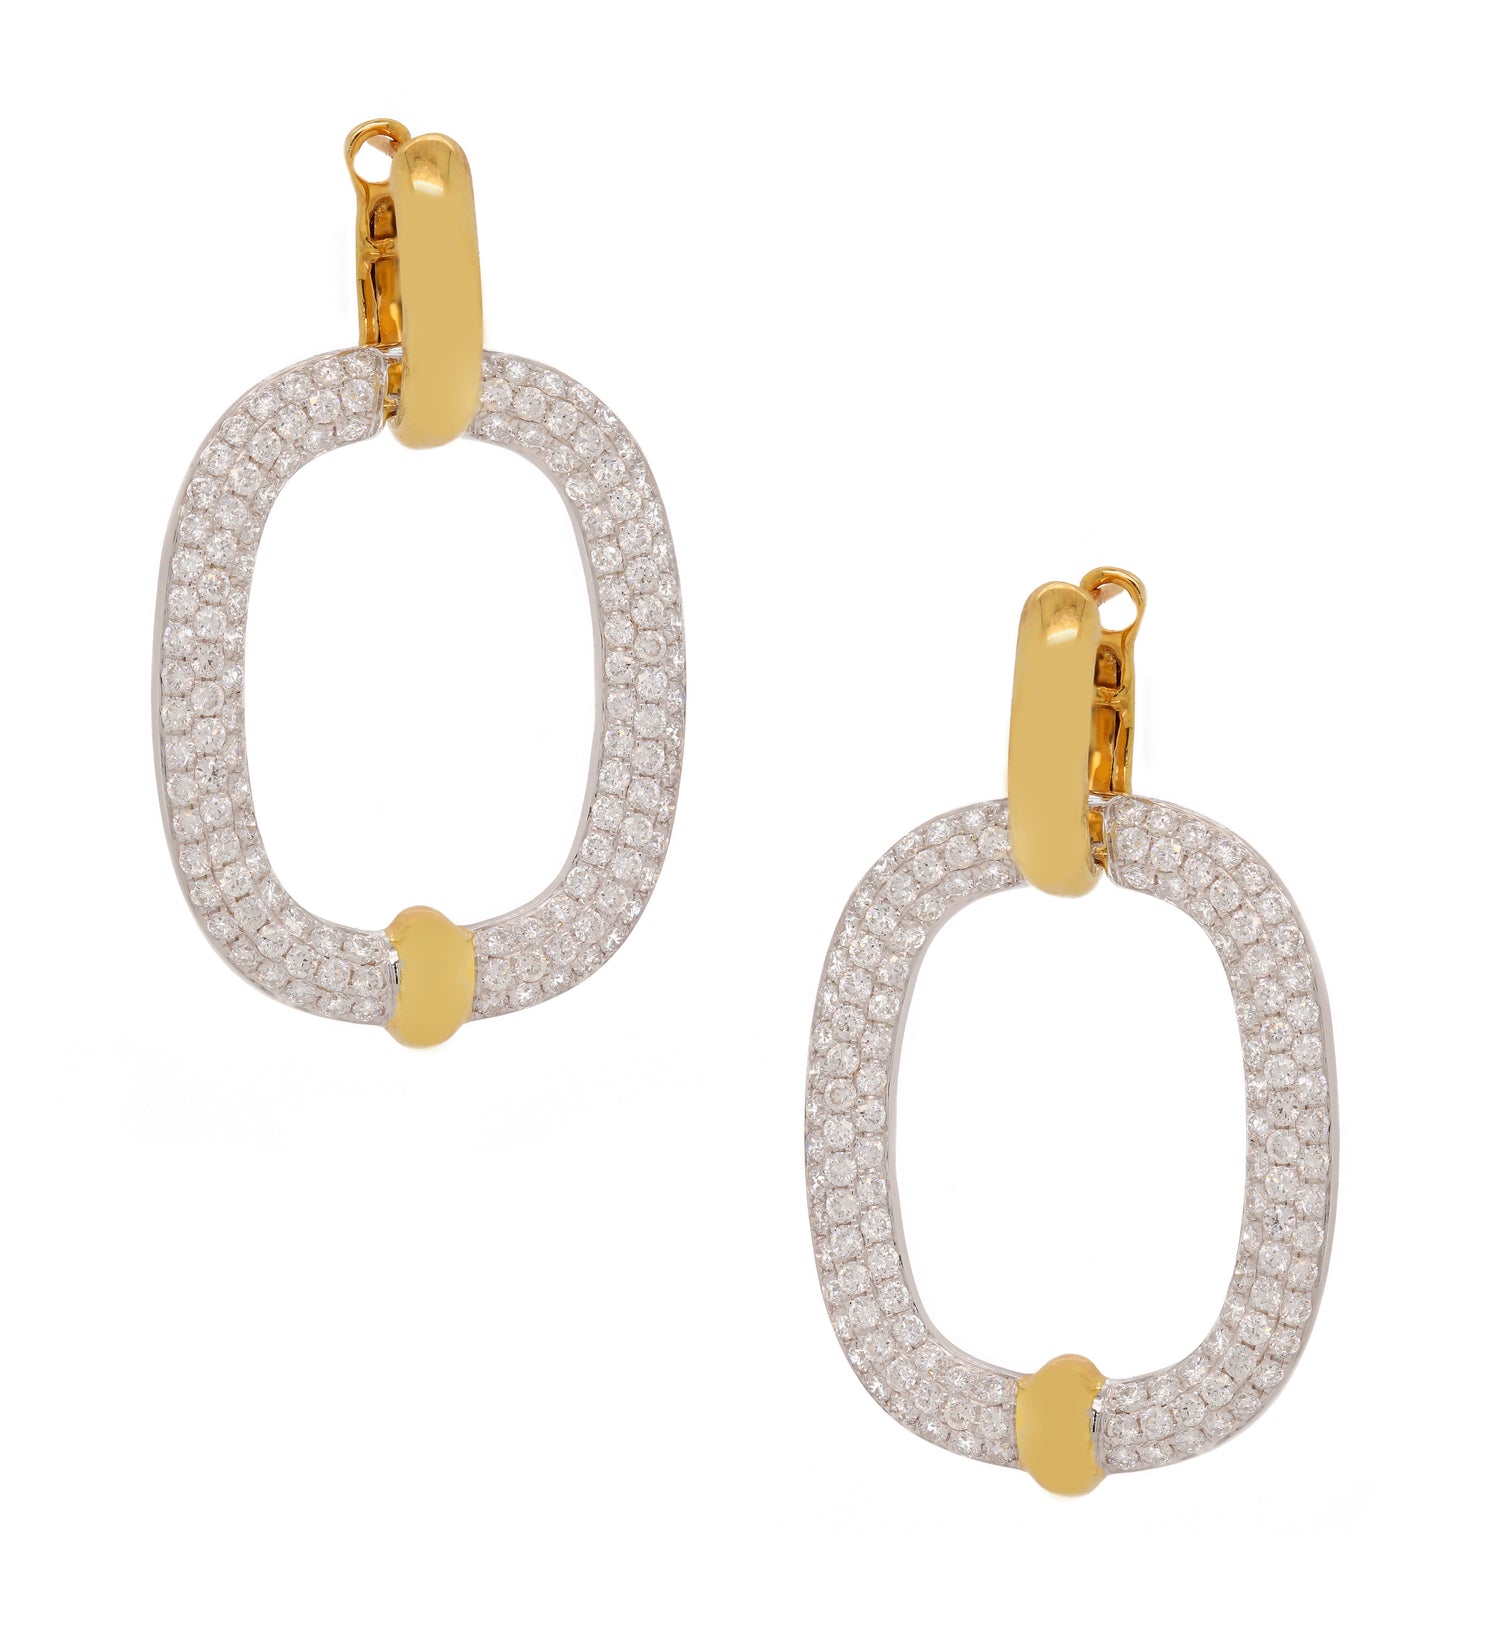 O-shaped 14K yellow gold drop earrings adorned with 2.44 carats of diamonds.